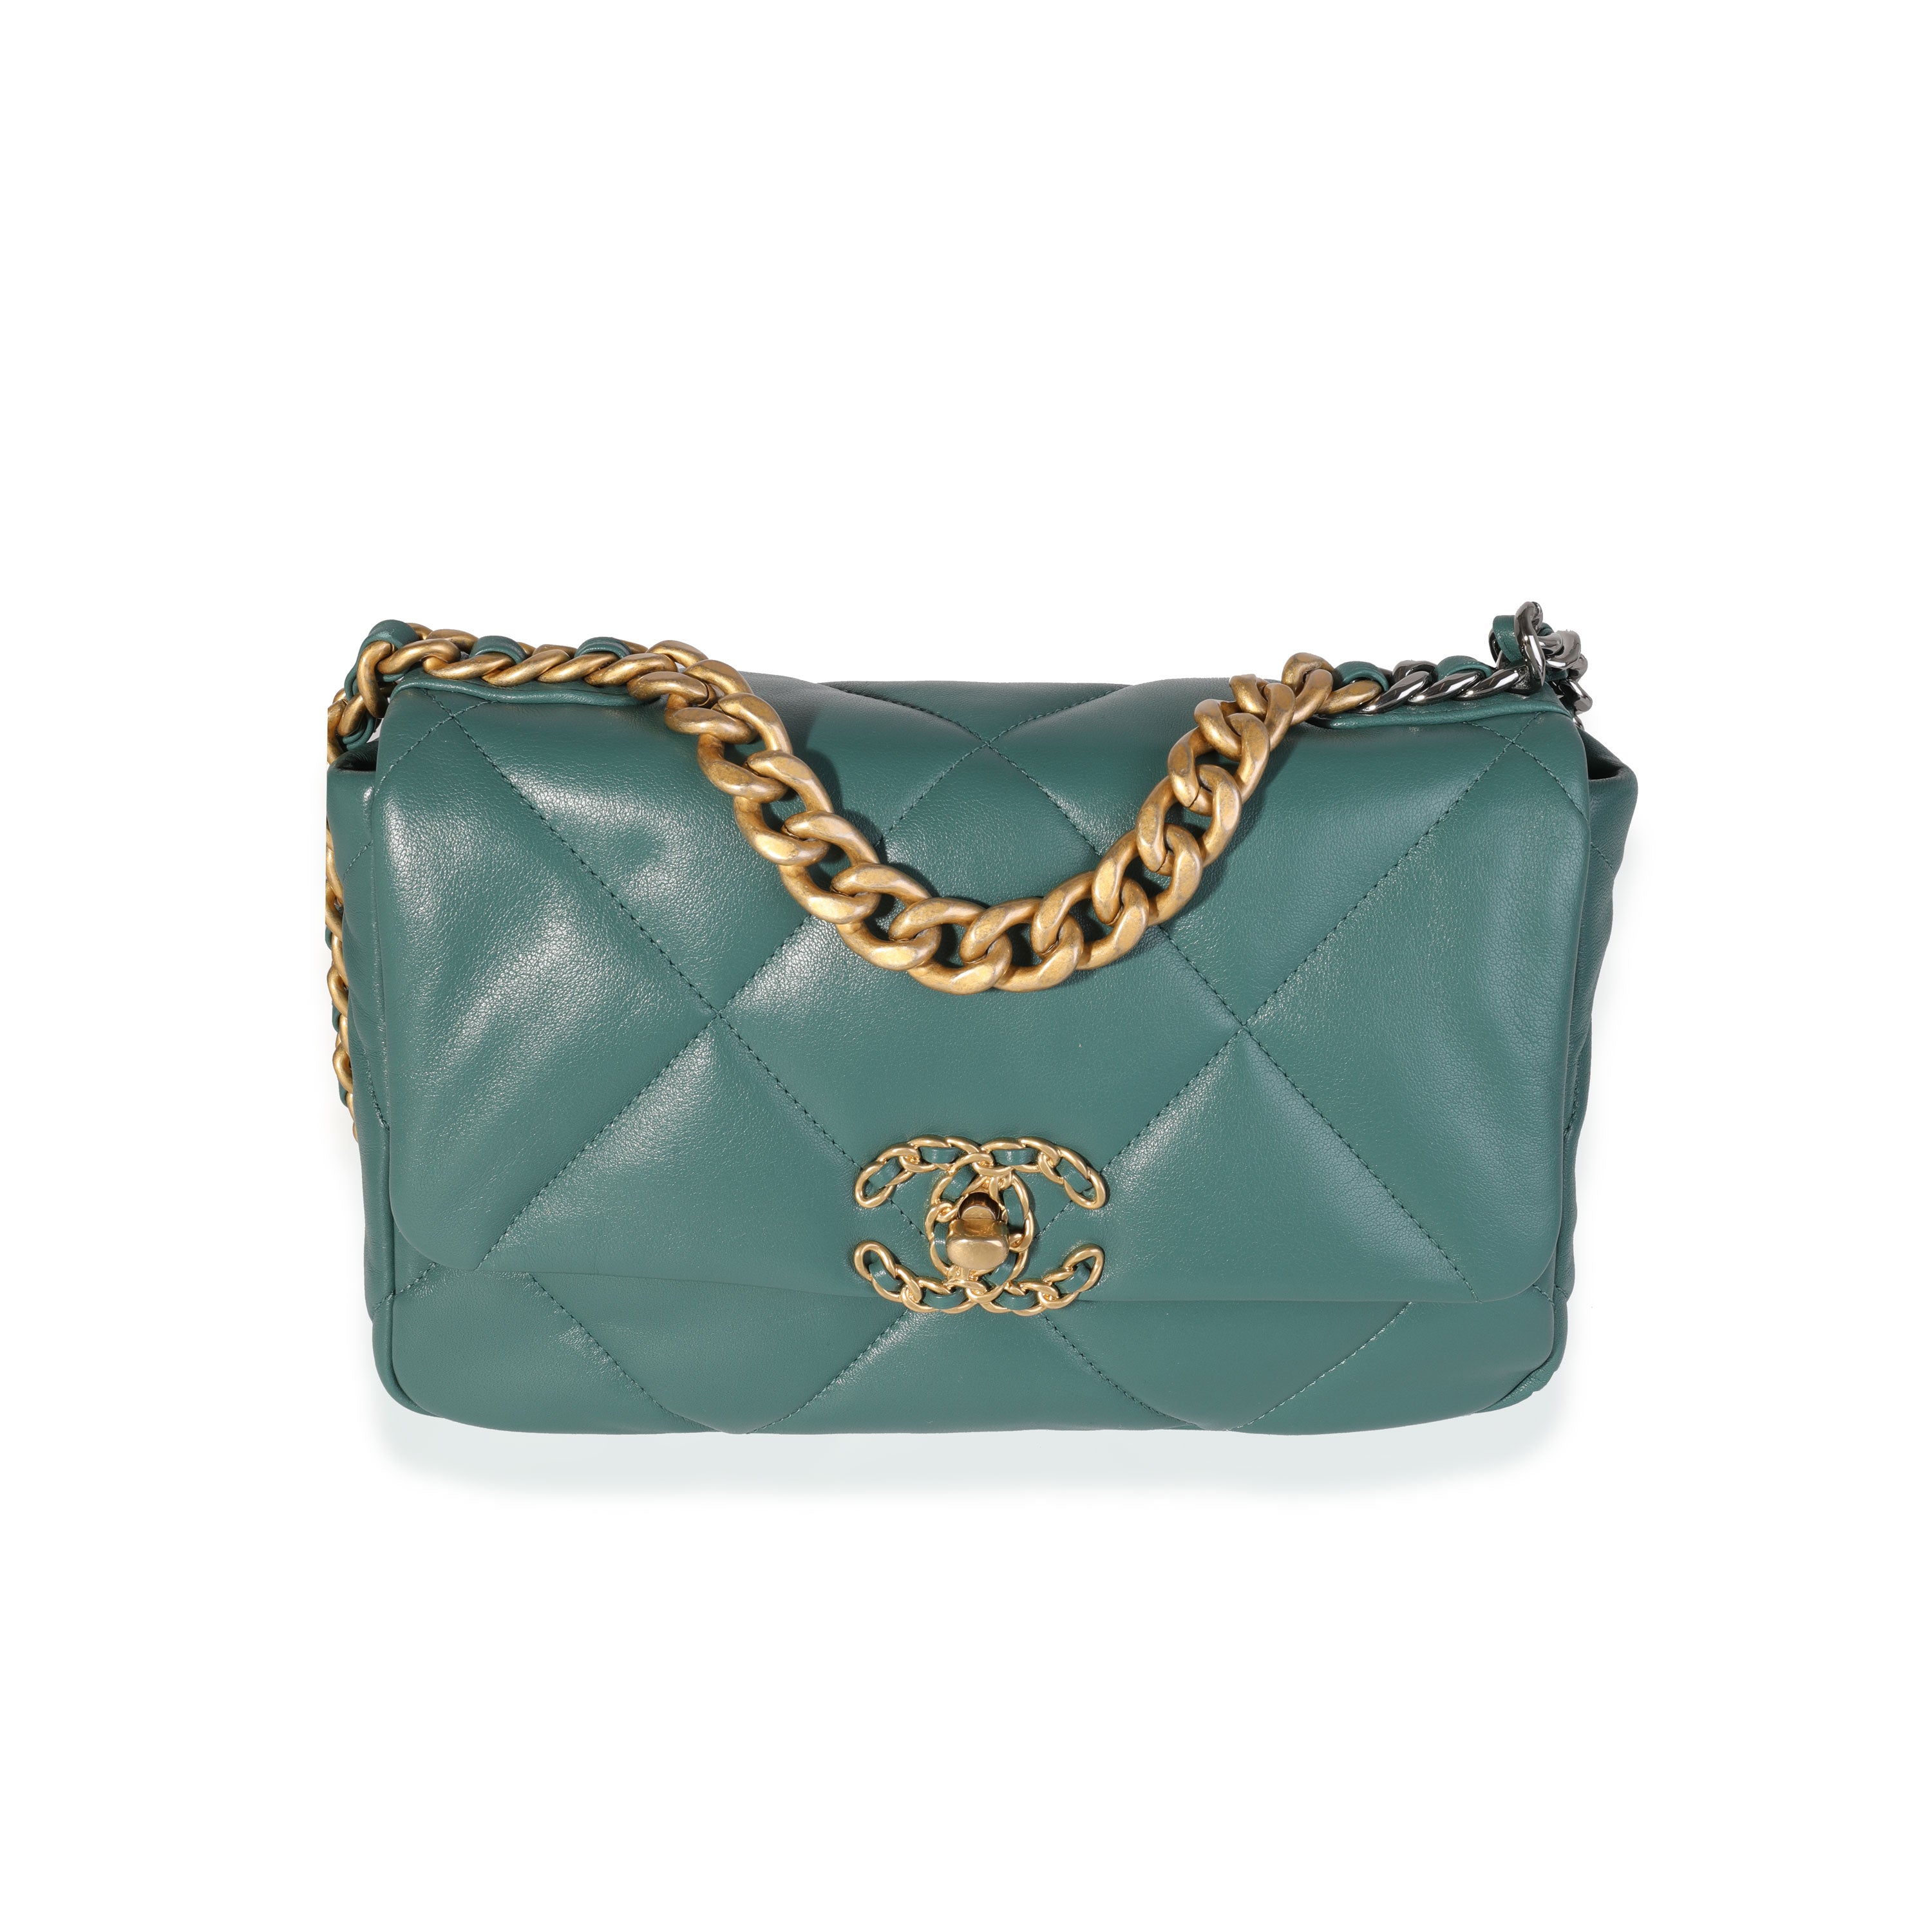 CHANEL Goatskin Quilted Medium Chanel 19 Flap Turquoise 445653